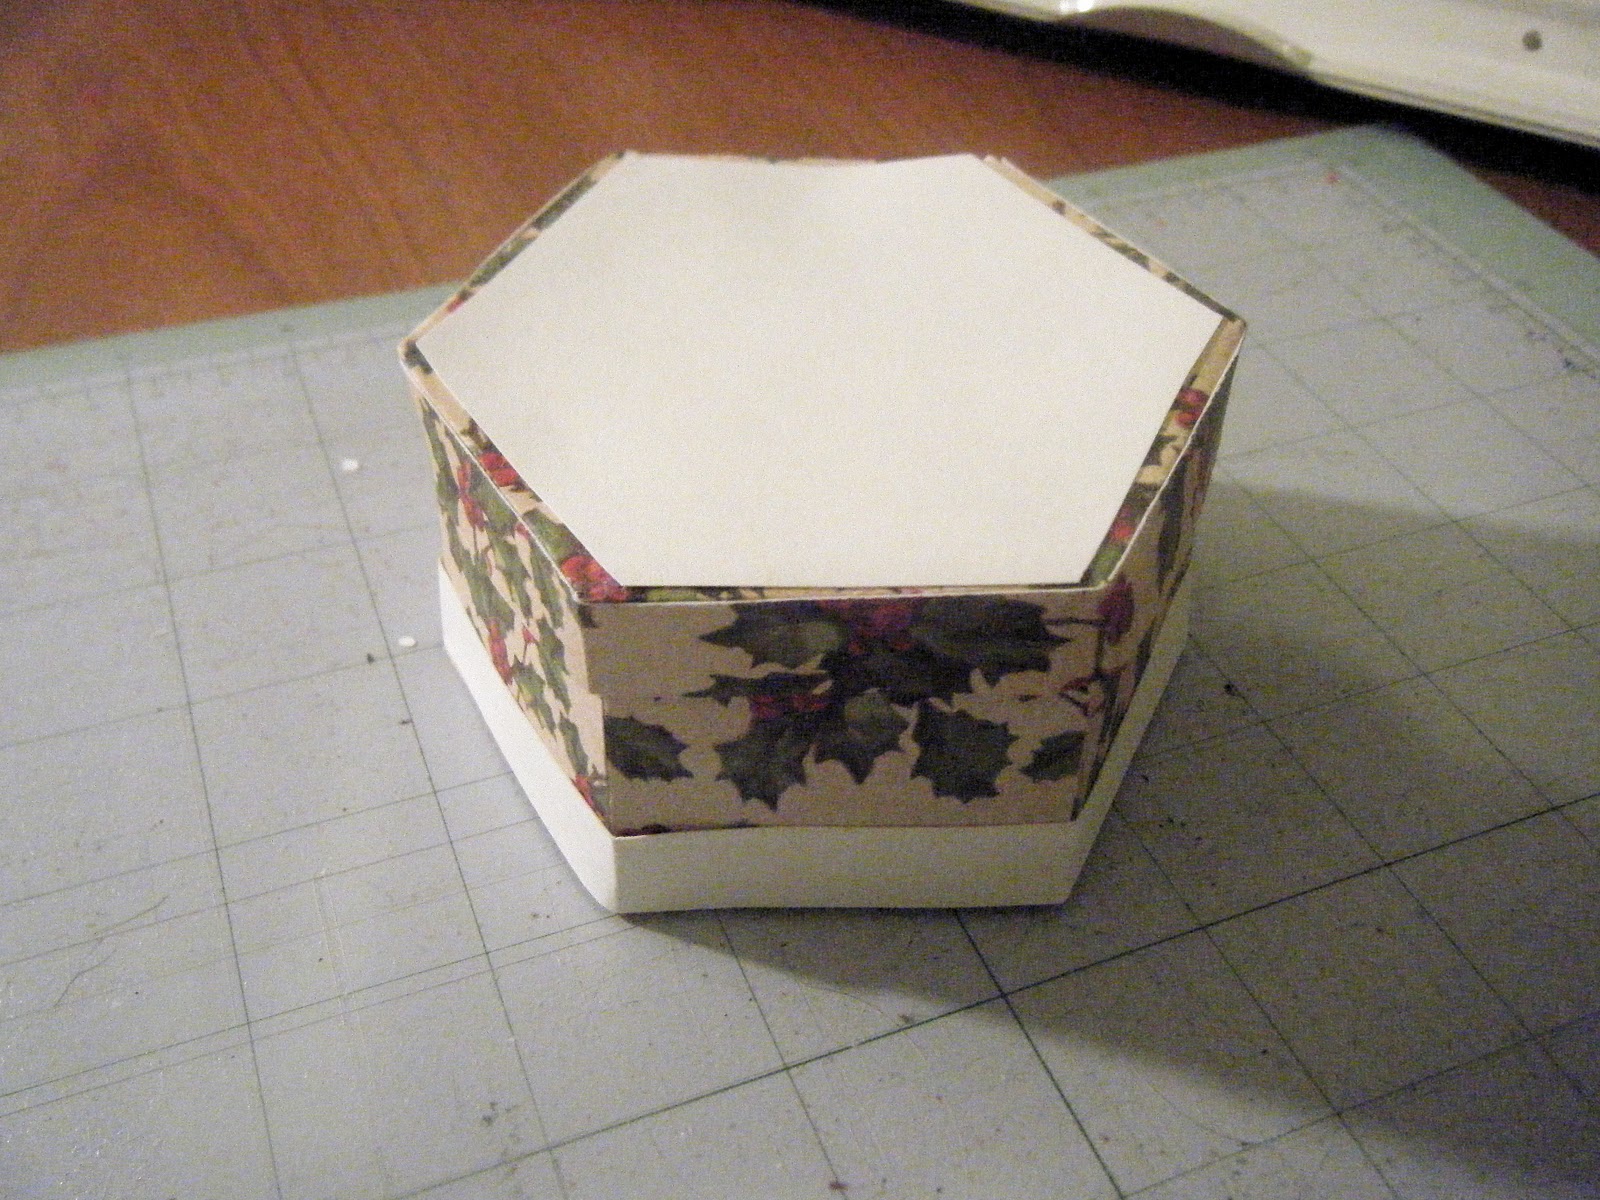 She's a Sassy Lady: A CUTE LITTLE POINSETTIA GIFT OR CANDY BOX